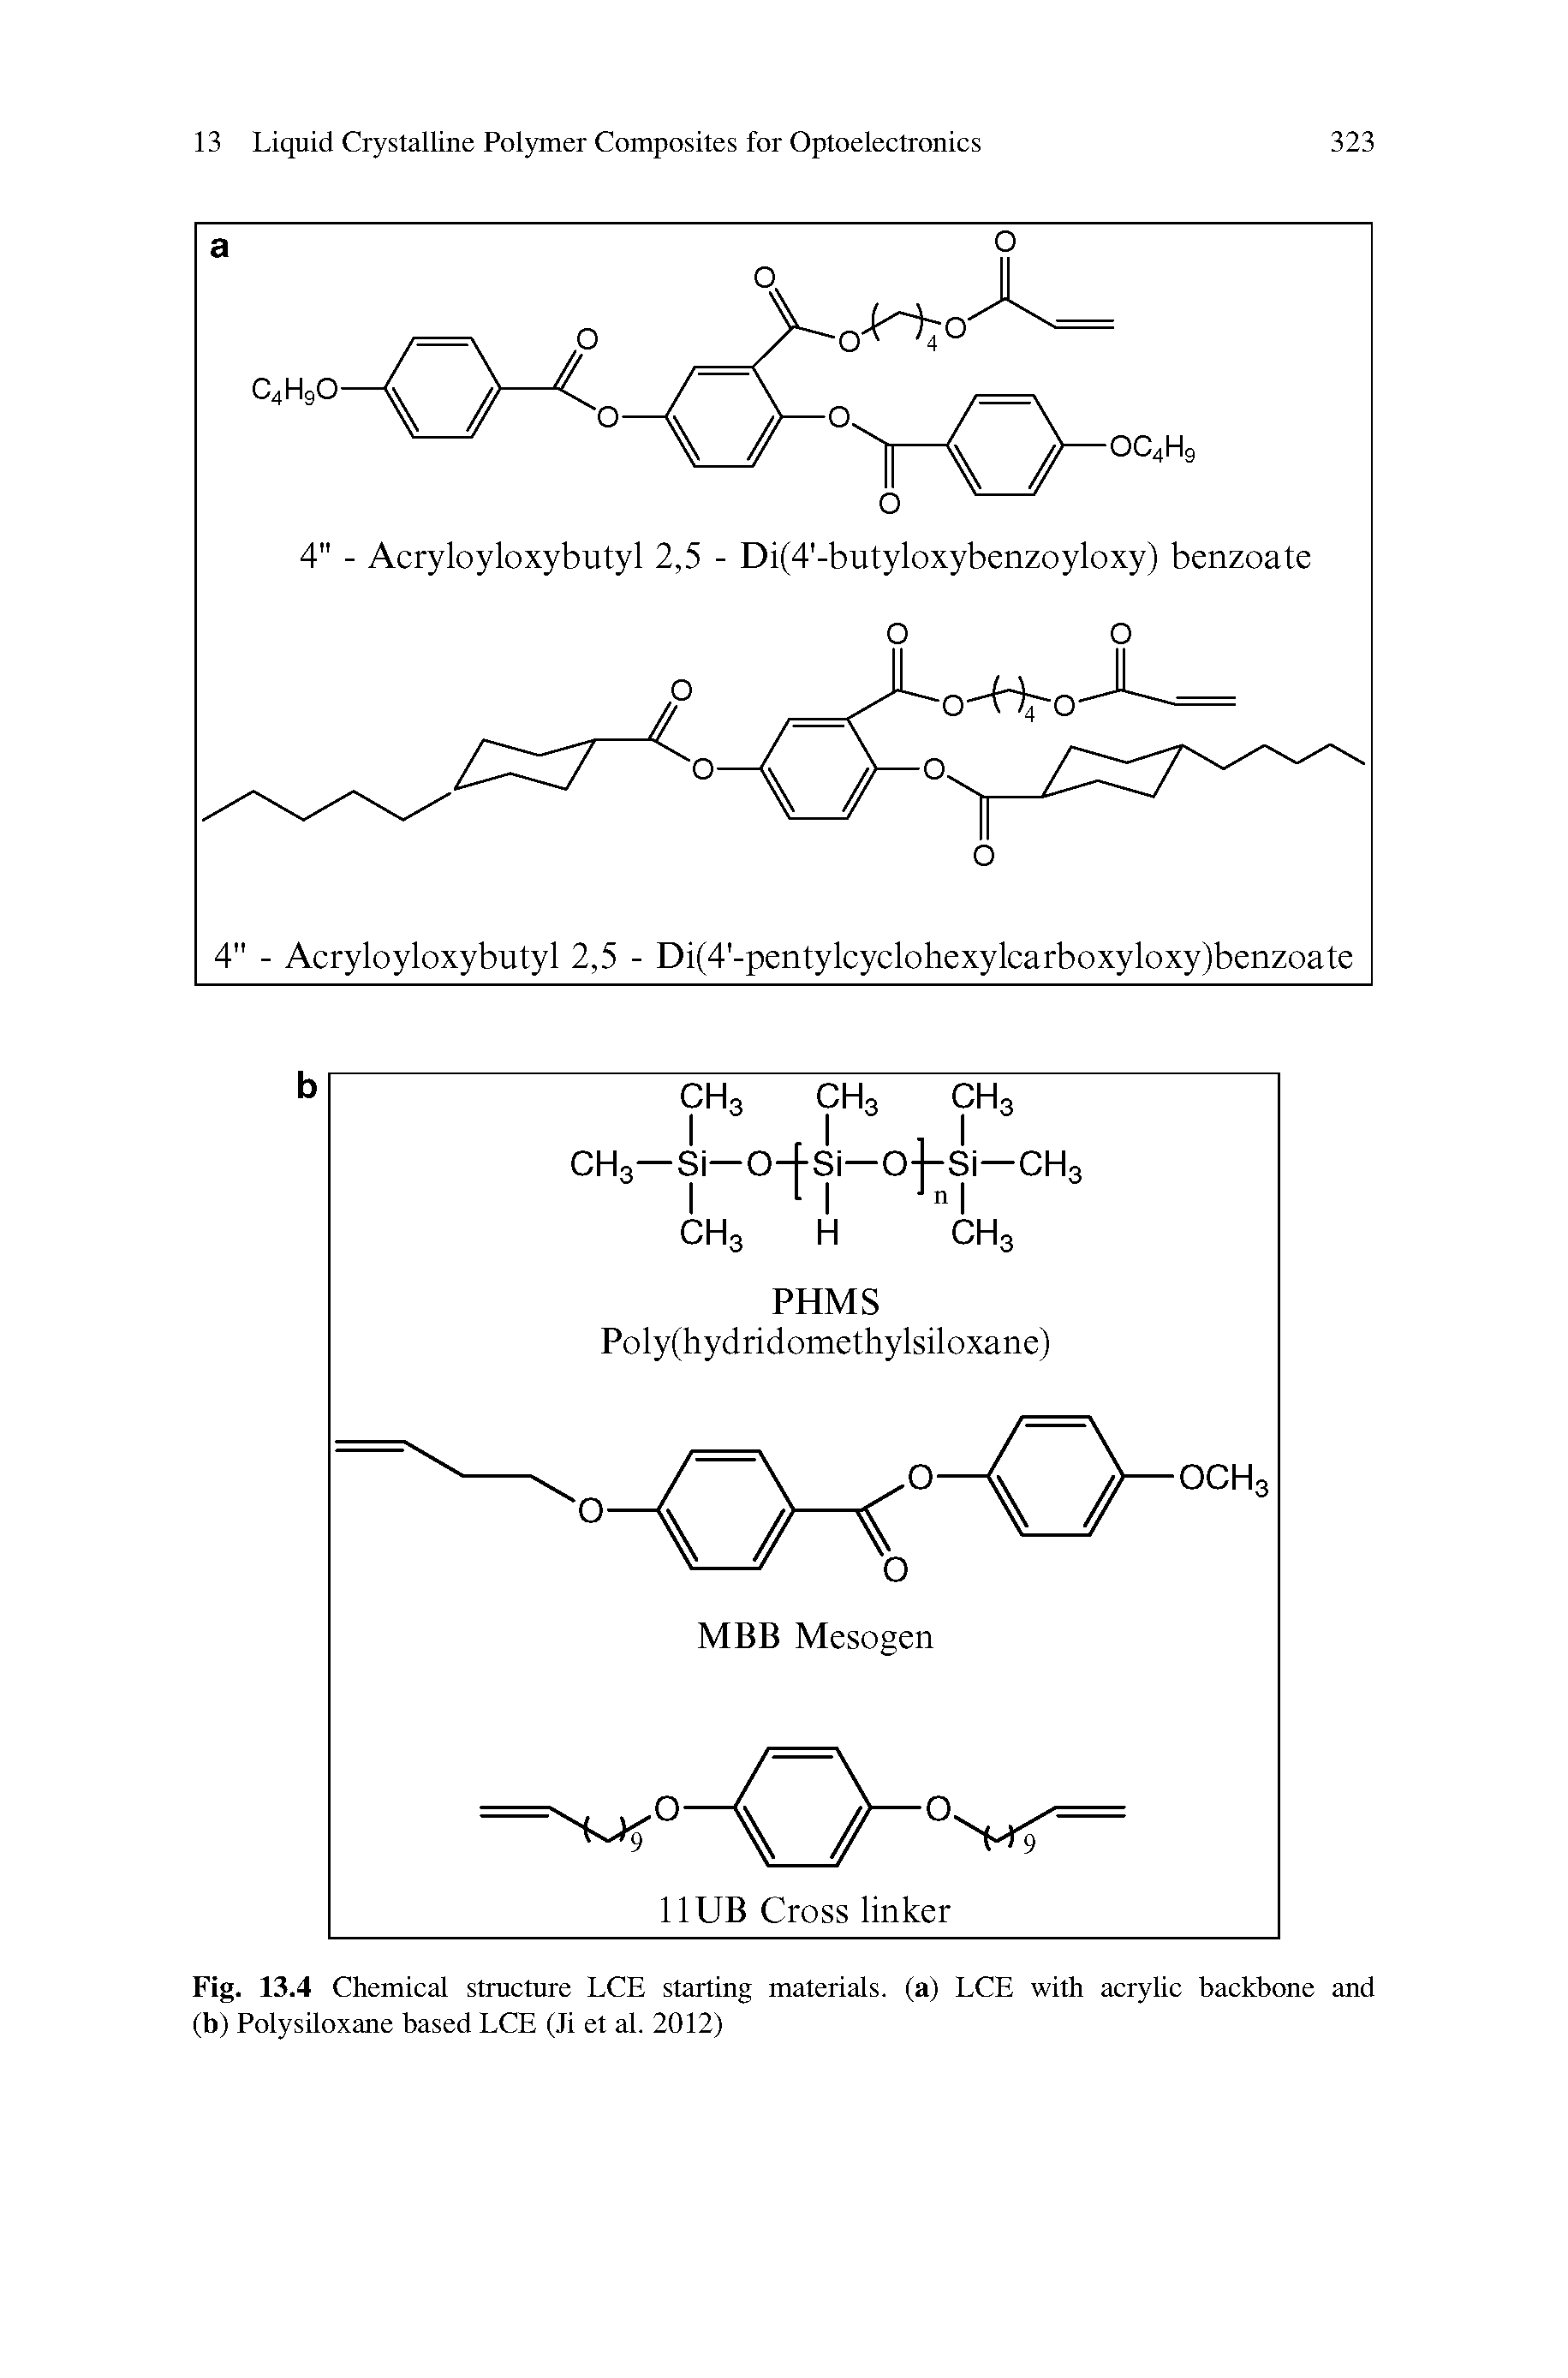 Fig. 13.4 Chemical structure LCE starting materials, (a) LCE with acrylic backbone and (b) Polysiloxane based LCE (Ji et al. 2012)...